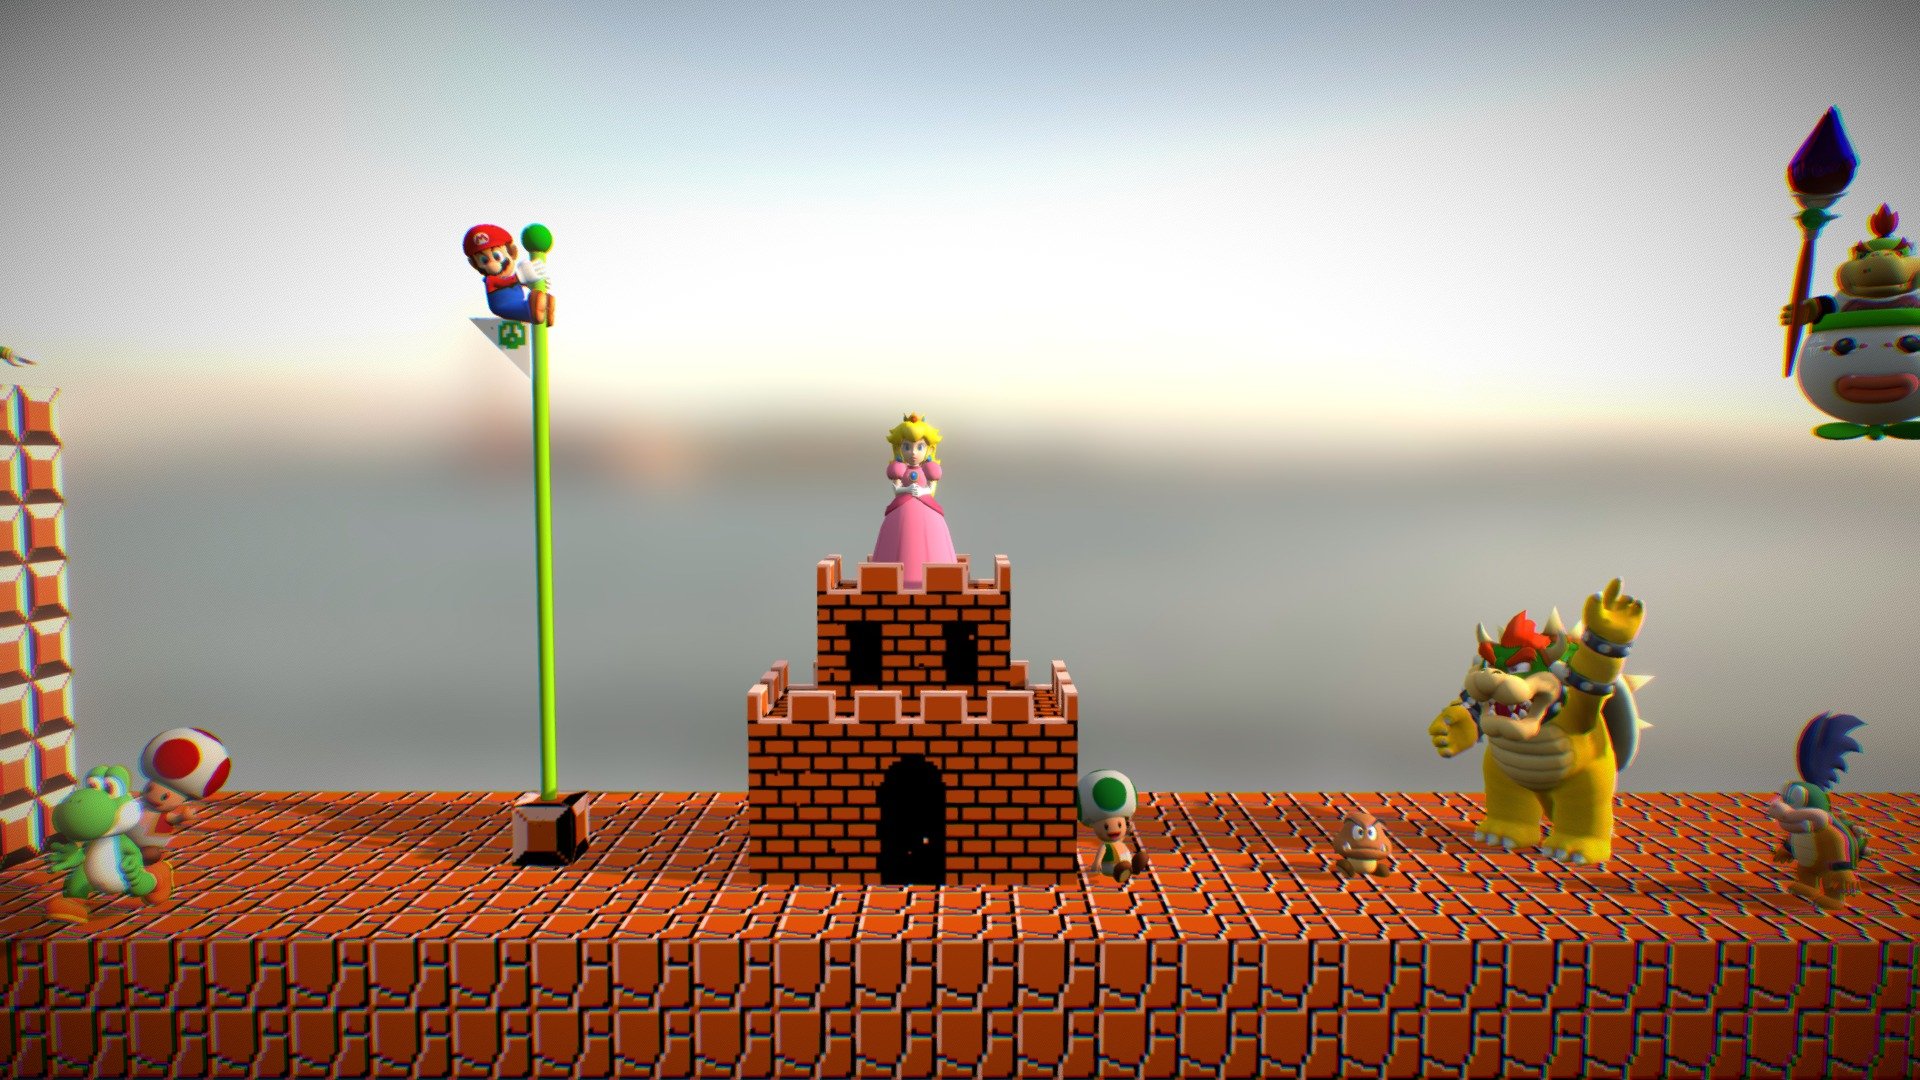 Mario model by: Nintega Dario

Luigi model by: Nintega Dario

Yoshi model by: Nintega Dario

Level 1-1 model by: Alfking49

Toad Brigade model by: OctoRock Studios

Princess Peach model by: The Pixeleur

Goomba model by: thartley

Koopa model by: akennedy007

Larry Koopa model by: lewrancelaura

Bowser model by: The Pixeleur

Bowser Jr model by: OctoRock Studios

All models listed as CC Attribution at time of download 3d model